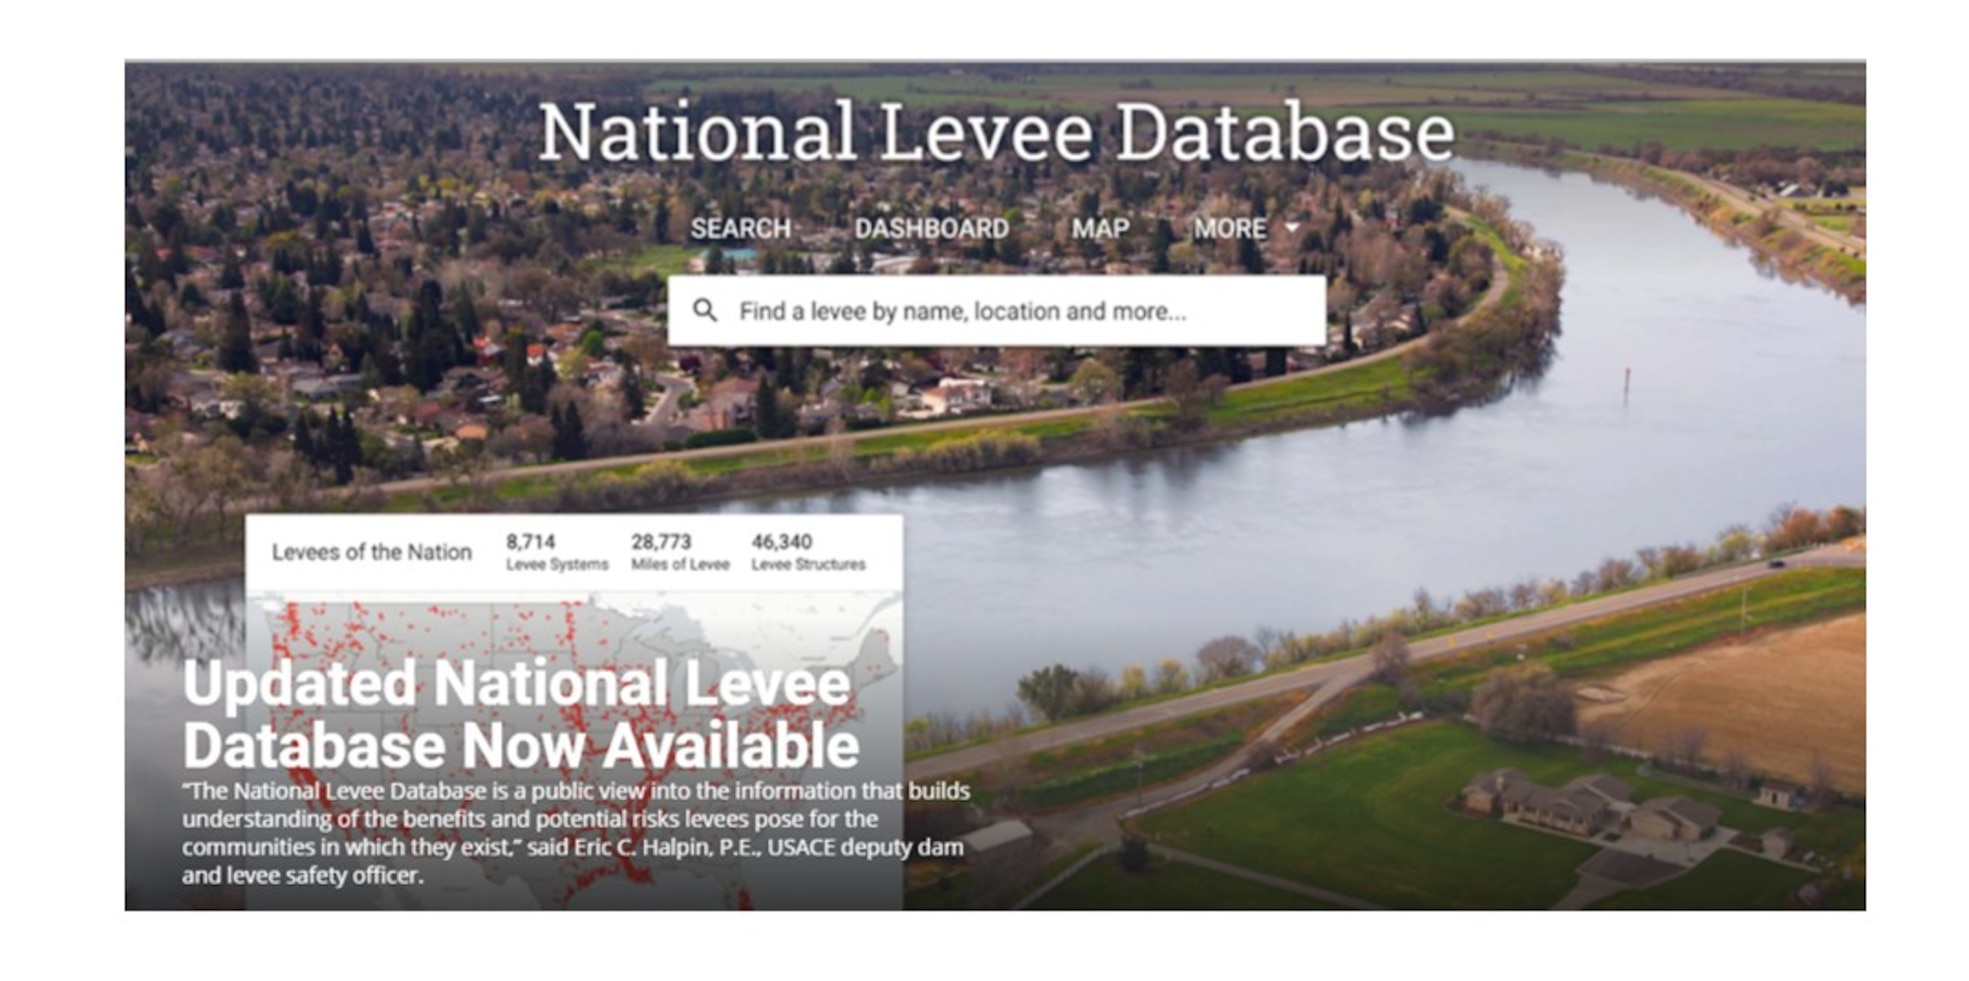 The National Levee Database is a public view into the information that builds understanding of the benefits and potential risks levees pose for the communities in which they exist.